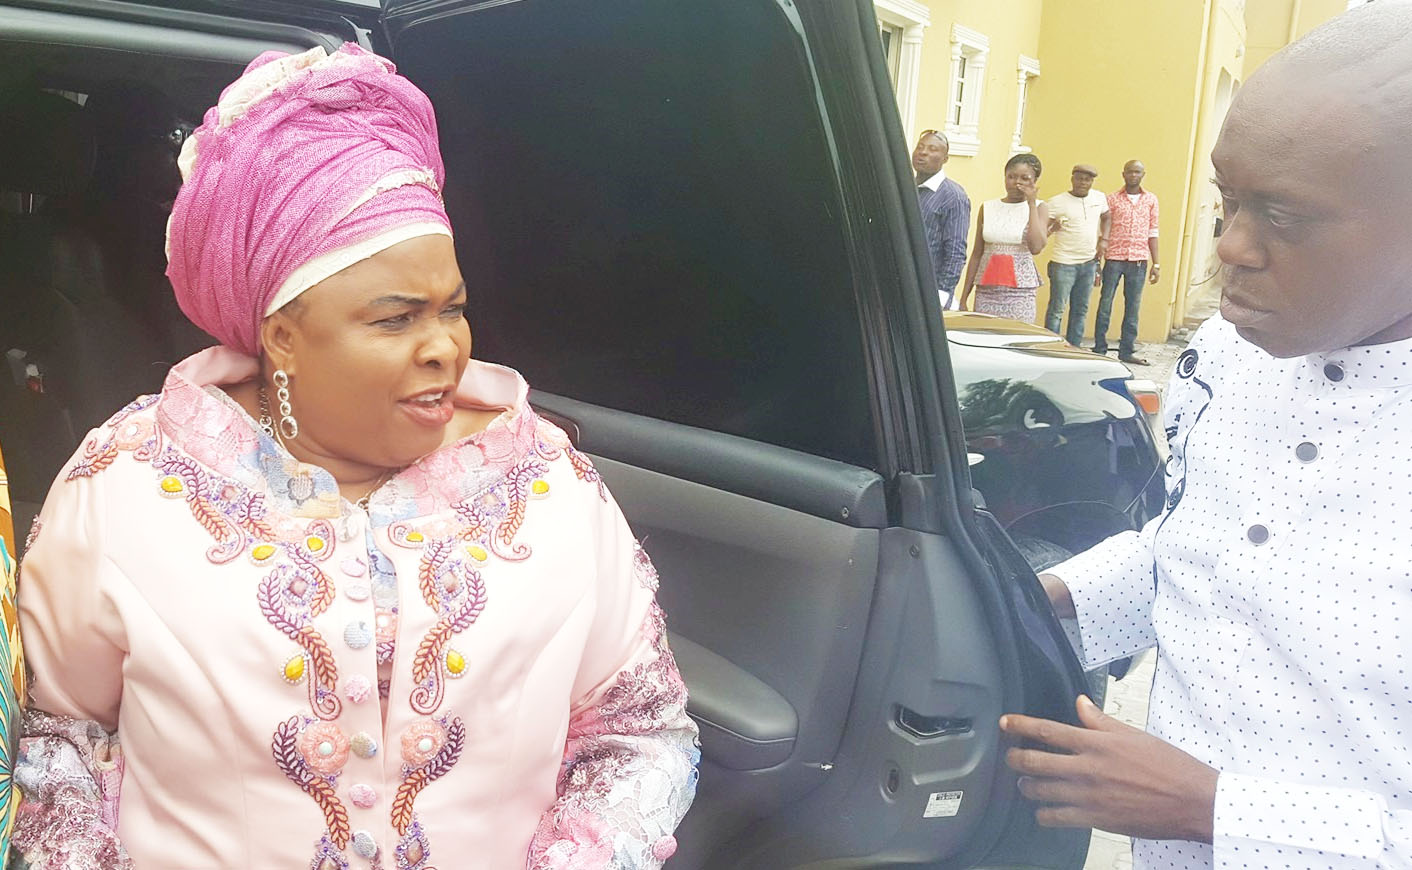 Patience Jonathan filed suit asking the Federal High Court in Lagos to unfreeze five U.S. dollar accounts at Nigeria's Skye Bank. They were frozen by the Economic and Financial Crimes Commission in July.